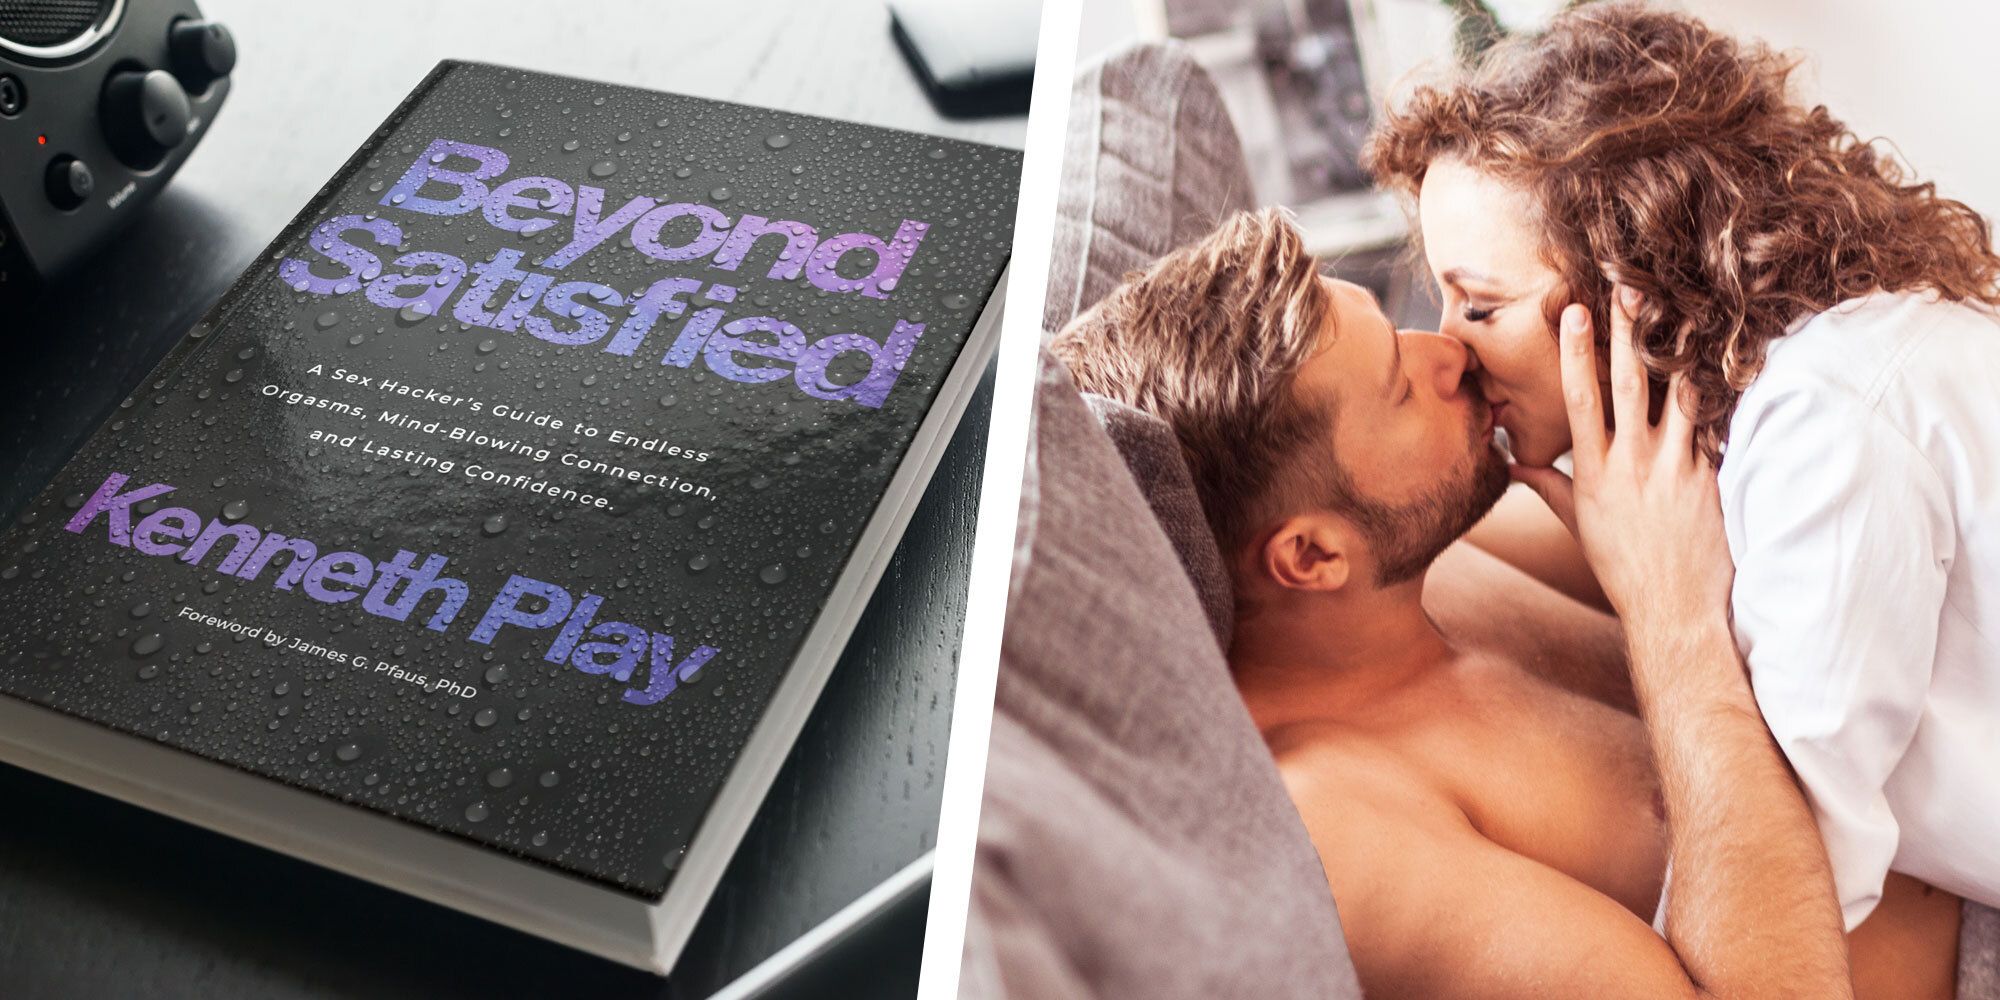 Sex Hacker Kenneth Play Talks Penis Size in Beyond Satisfied Book image pic